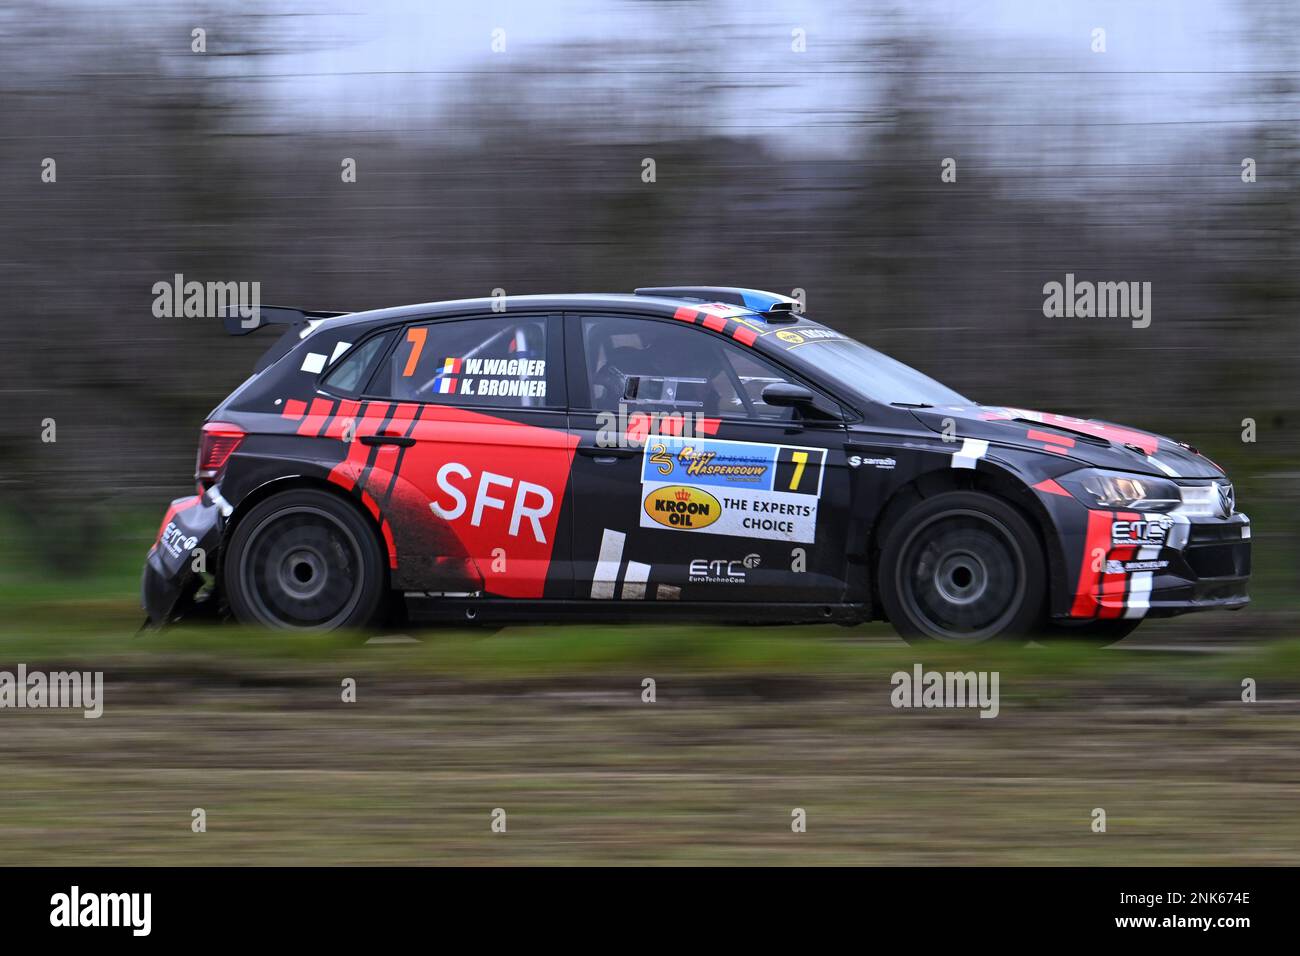 Sint-Truiden, Belgium, 23/02/2023, Belgian Gino Bux and Anthony Bourdeaud'hui in their Volkswagen Polo of team Ebrt pictured during the Shakedown test ride before this weekend's Haspengouw Rally event, Thursday 23 February 2023 in Sint-Truiden, the first stage of the Belgian Rally Championship. BELGA PHOTO LUC CLAESSEN Stock Photo